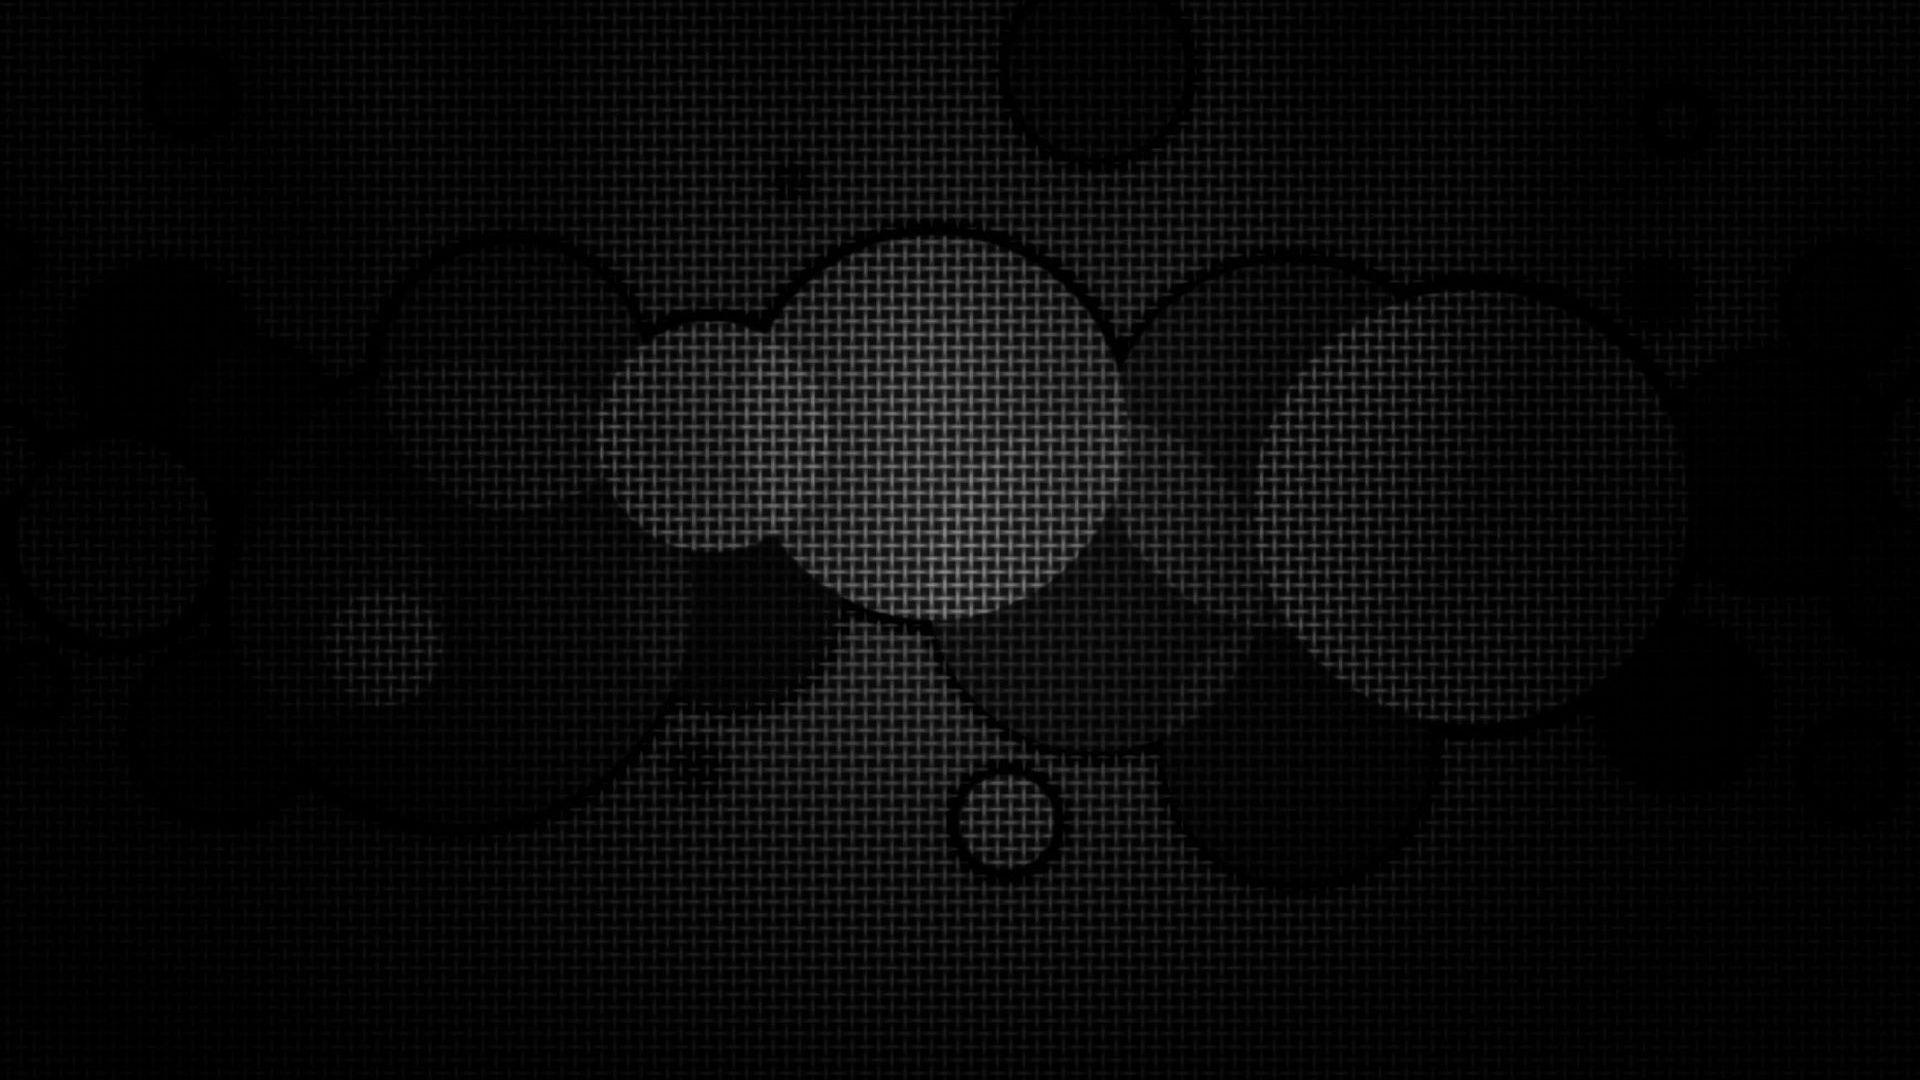 HD Black And White Wallpaper For Free Download (Resolution 1080p)